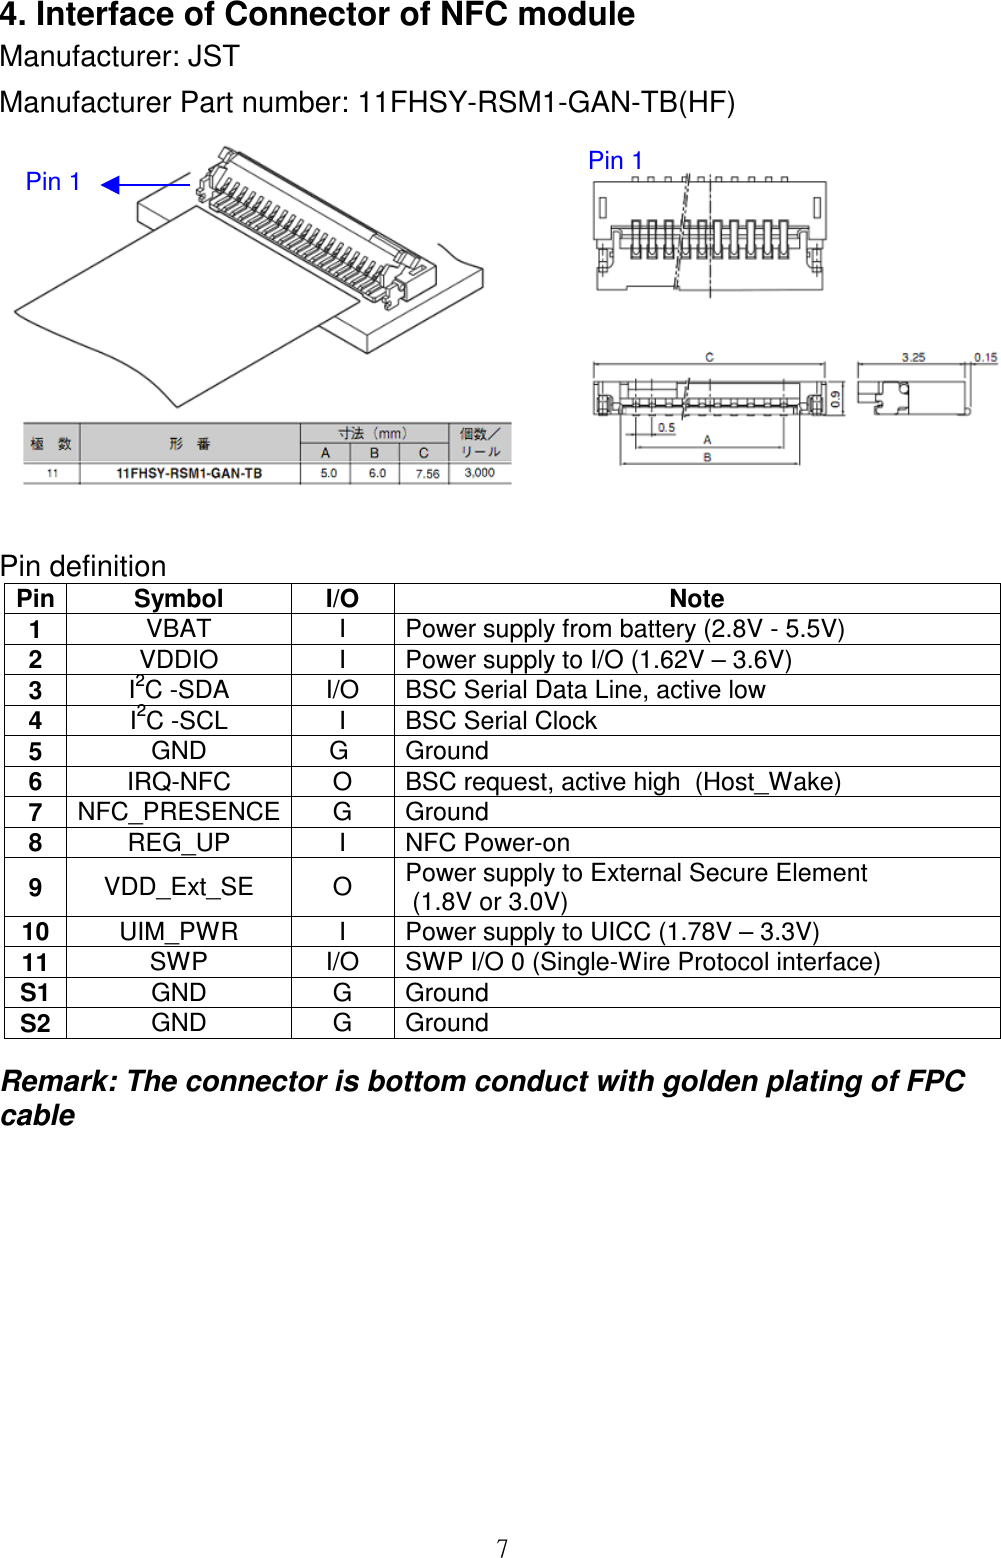  74. Interface of Connector of NFC module Manufacturer: JST Manufacturer Part number: 11FHSY-RSM1-GAN-TB(HF)   Pin definition  Pin Symbol  I/O  Note 1  VBAT  I  Power supply from battery (2.8V - 5.5V) 2  VDDIO  I  Power supply to I/O (1.62V – 3.6V) 3  I2C -SDA  I/O  BSC Serial Data Line, active low 4  I2C -SCL  I  BSC Serial Clock 5  GND  G   Ground  6  IRQ-NFC  O  BSC request, active high  (Host_Wake) 7  NFC_PRESENCE G  Ground 8  REG_UP  I  NFC Power-on 9  VDD_Ext_SE  O  Power supply to External Secure Element  (1.8V or 3.0V) 10 UIM_PWR  I  Power supply to UICC (1.78V – 3.3V) 11 SWP  I/O  SWP I/O 0 (Single-Wire Protocol interface) S1 GND  G  Ground S2 GND  G  Ground Remark: The connector is bottom conduct with golden plating of FPC cable        Pin 1 Pin 1 